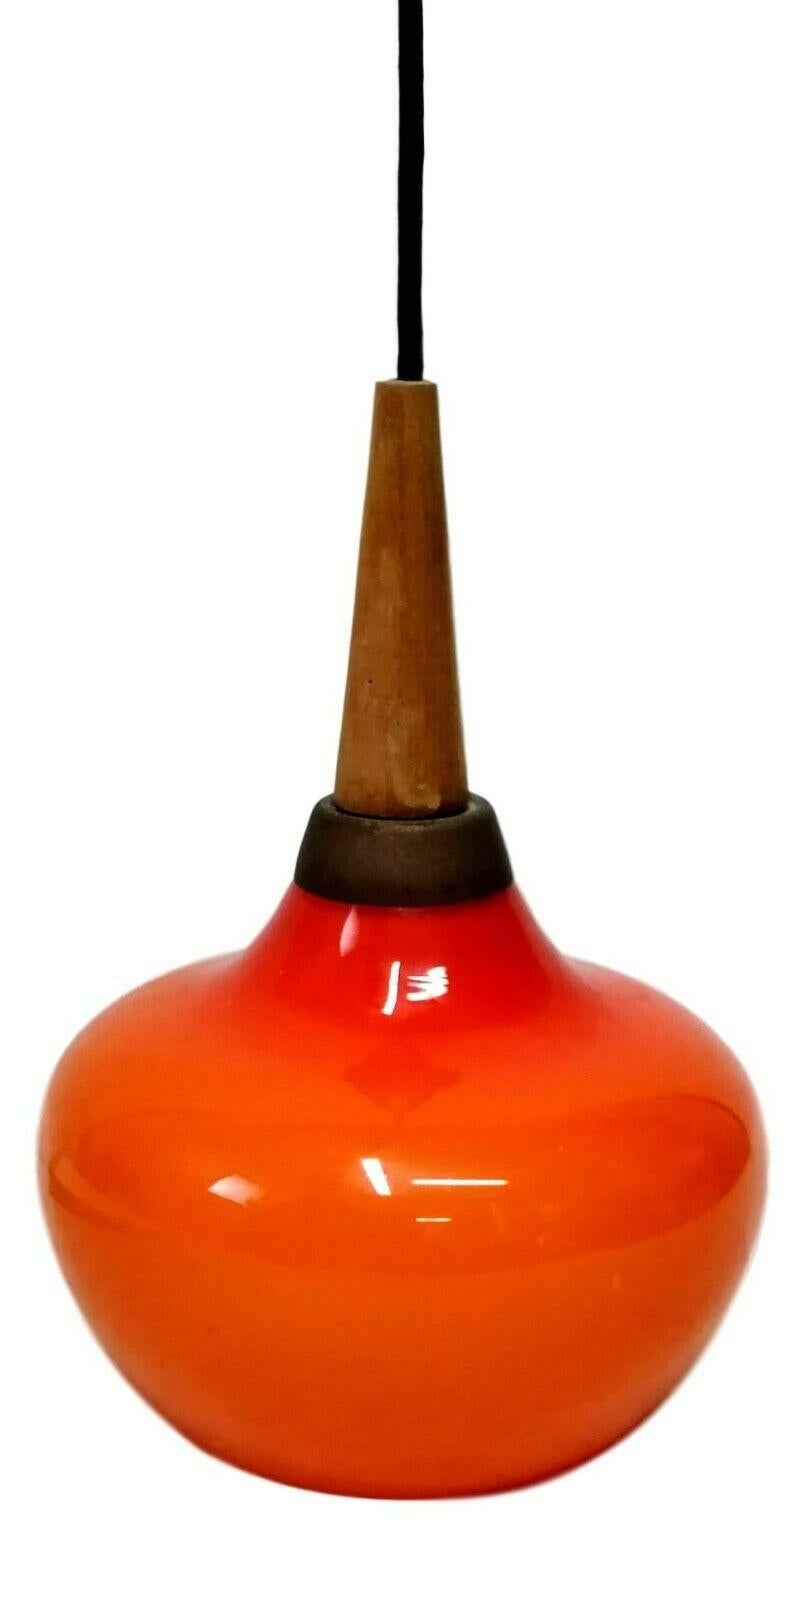 pendant lamp in glass murano blown, original production glassware vistosi

the bright orange diffuser measures 27 cm in height, including the wooden part

Very good condition, as shown in photos, slight obvious signs of aging, glass intact, with